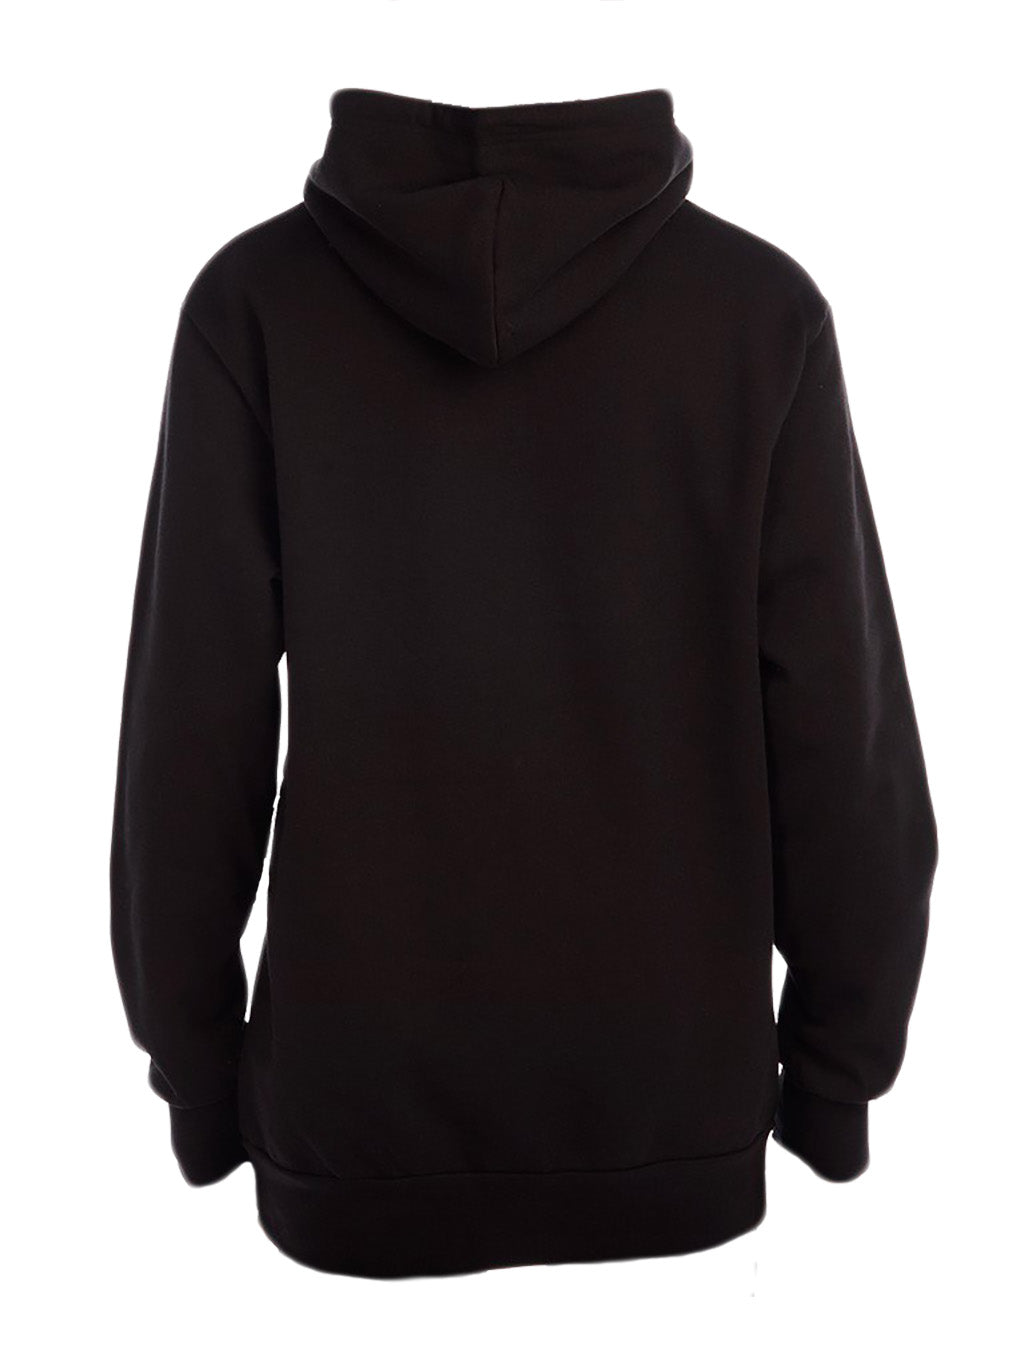 Social Distancing Expert - Hoodie - BuyAbility South Africa